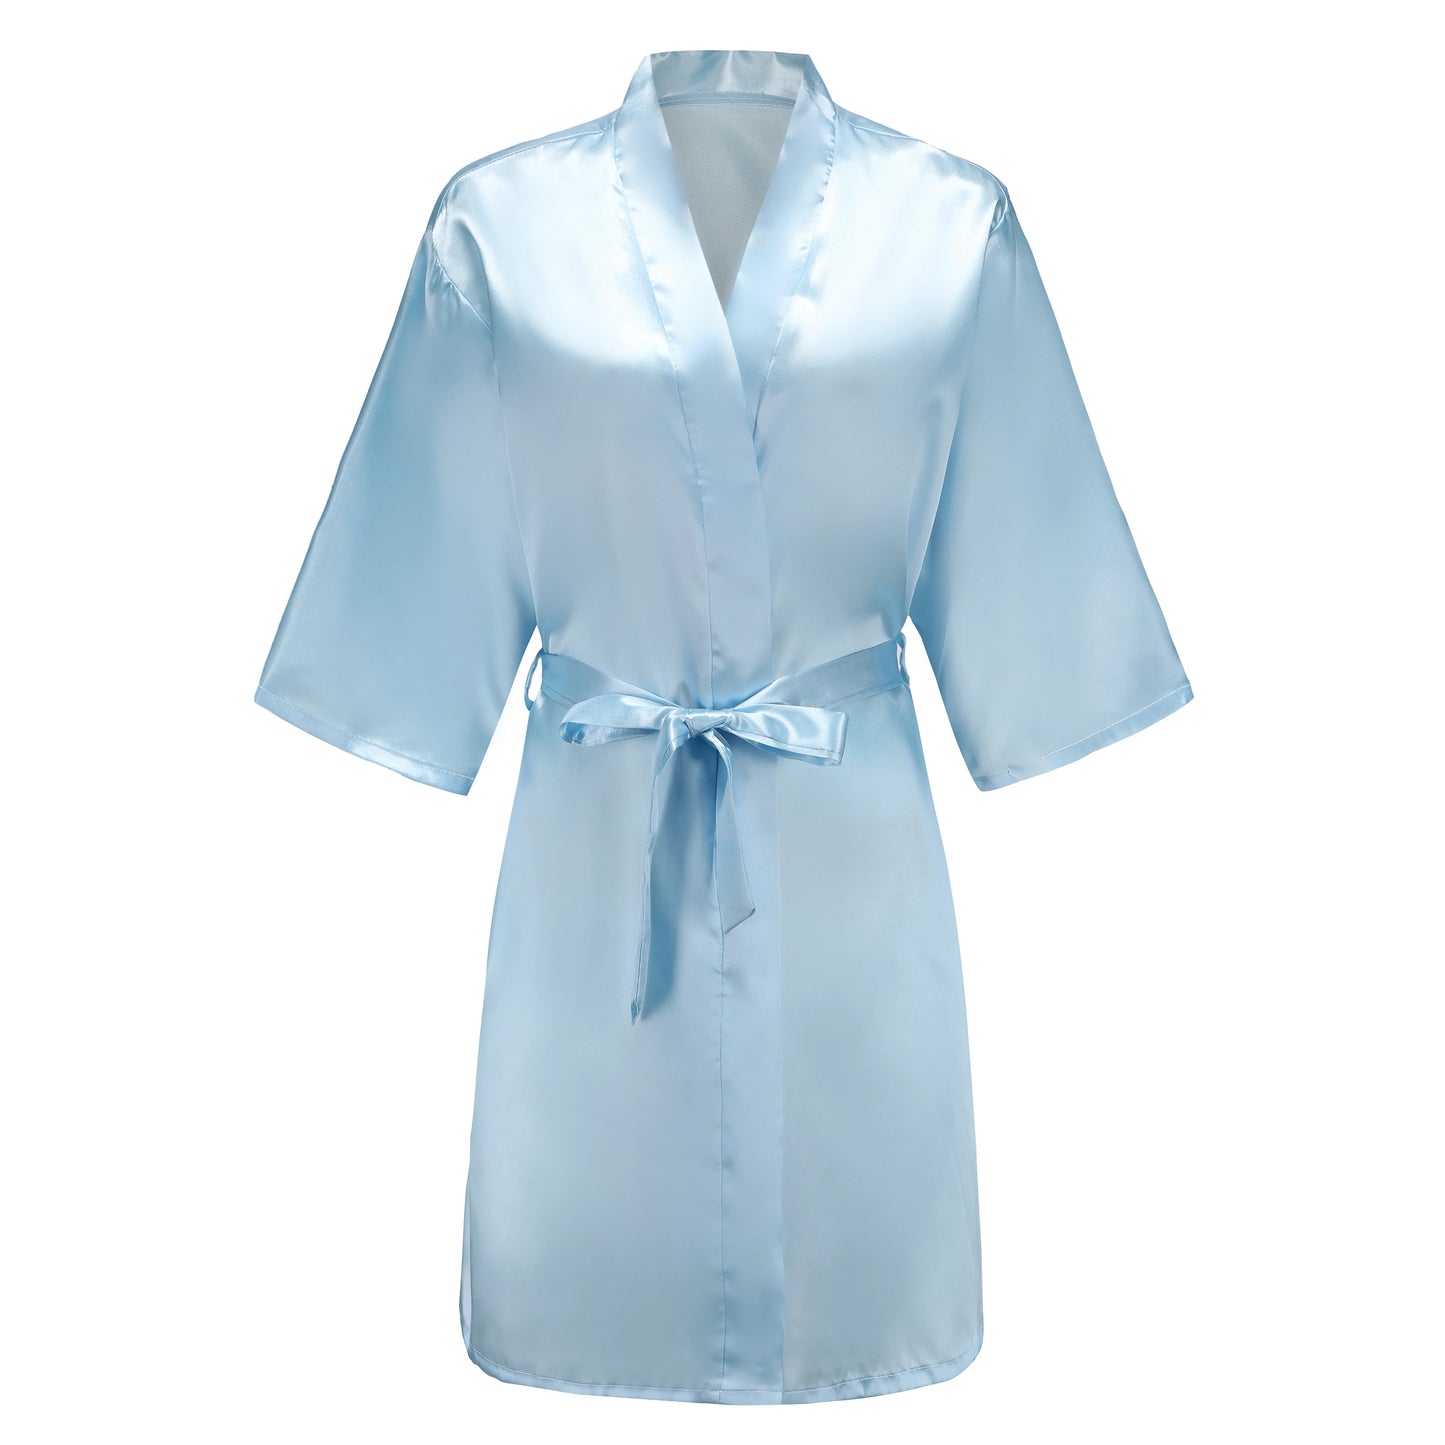 Team Bride Personalised Satin Robes - Robes from Dear Cece - Just £19.99! Shop now at Dear Cece